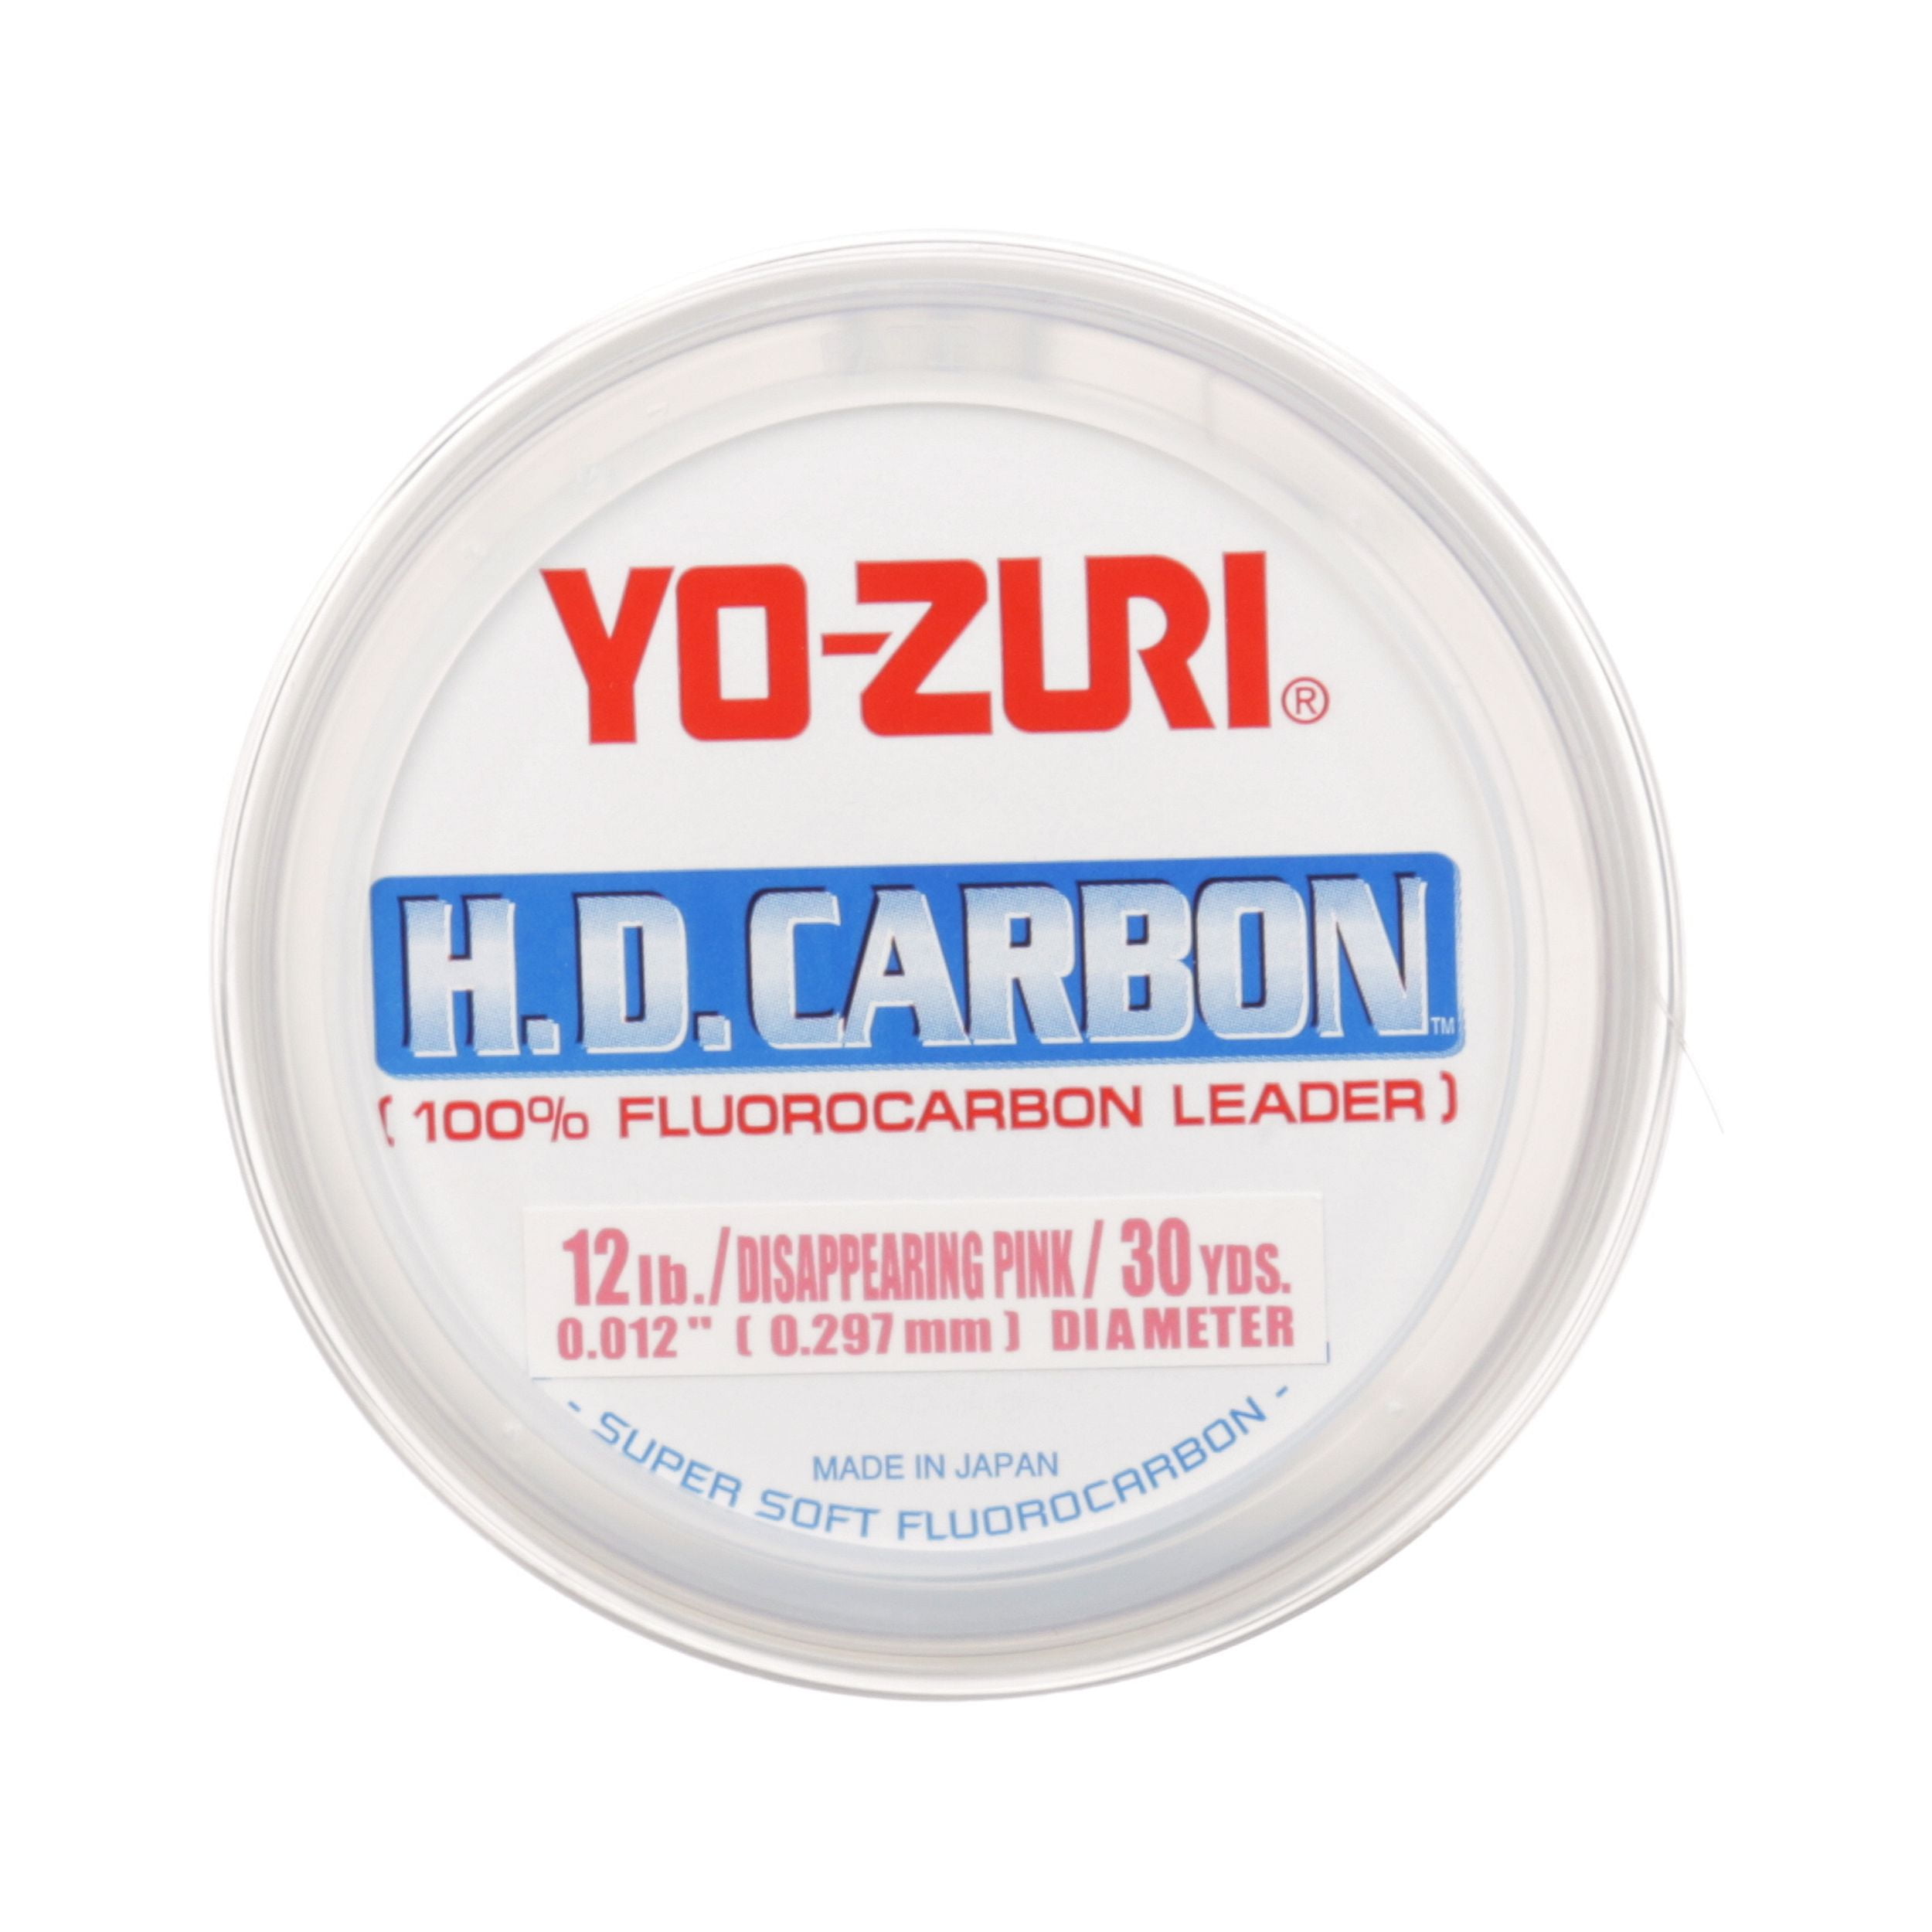 Yo-Zuri Topknot Fluorocarbon Leader 60 lb / 30 yd / Disappearing Pink